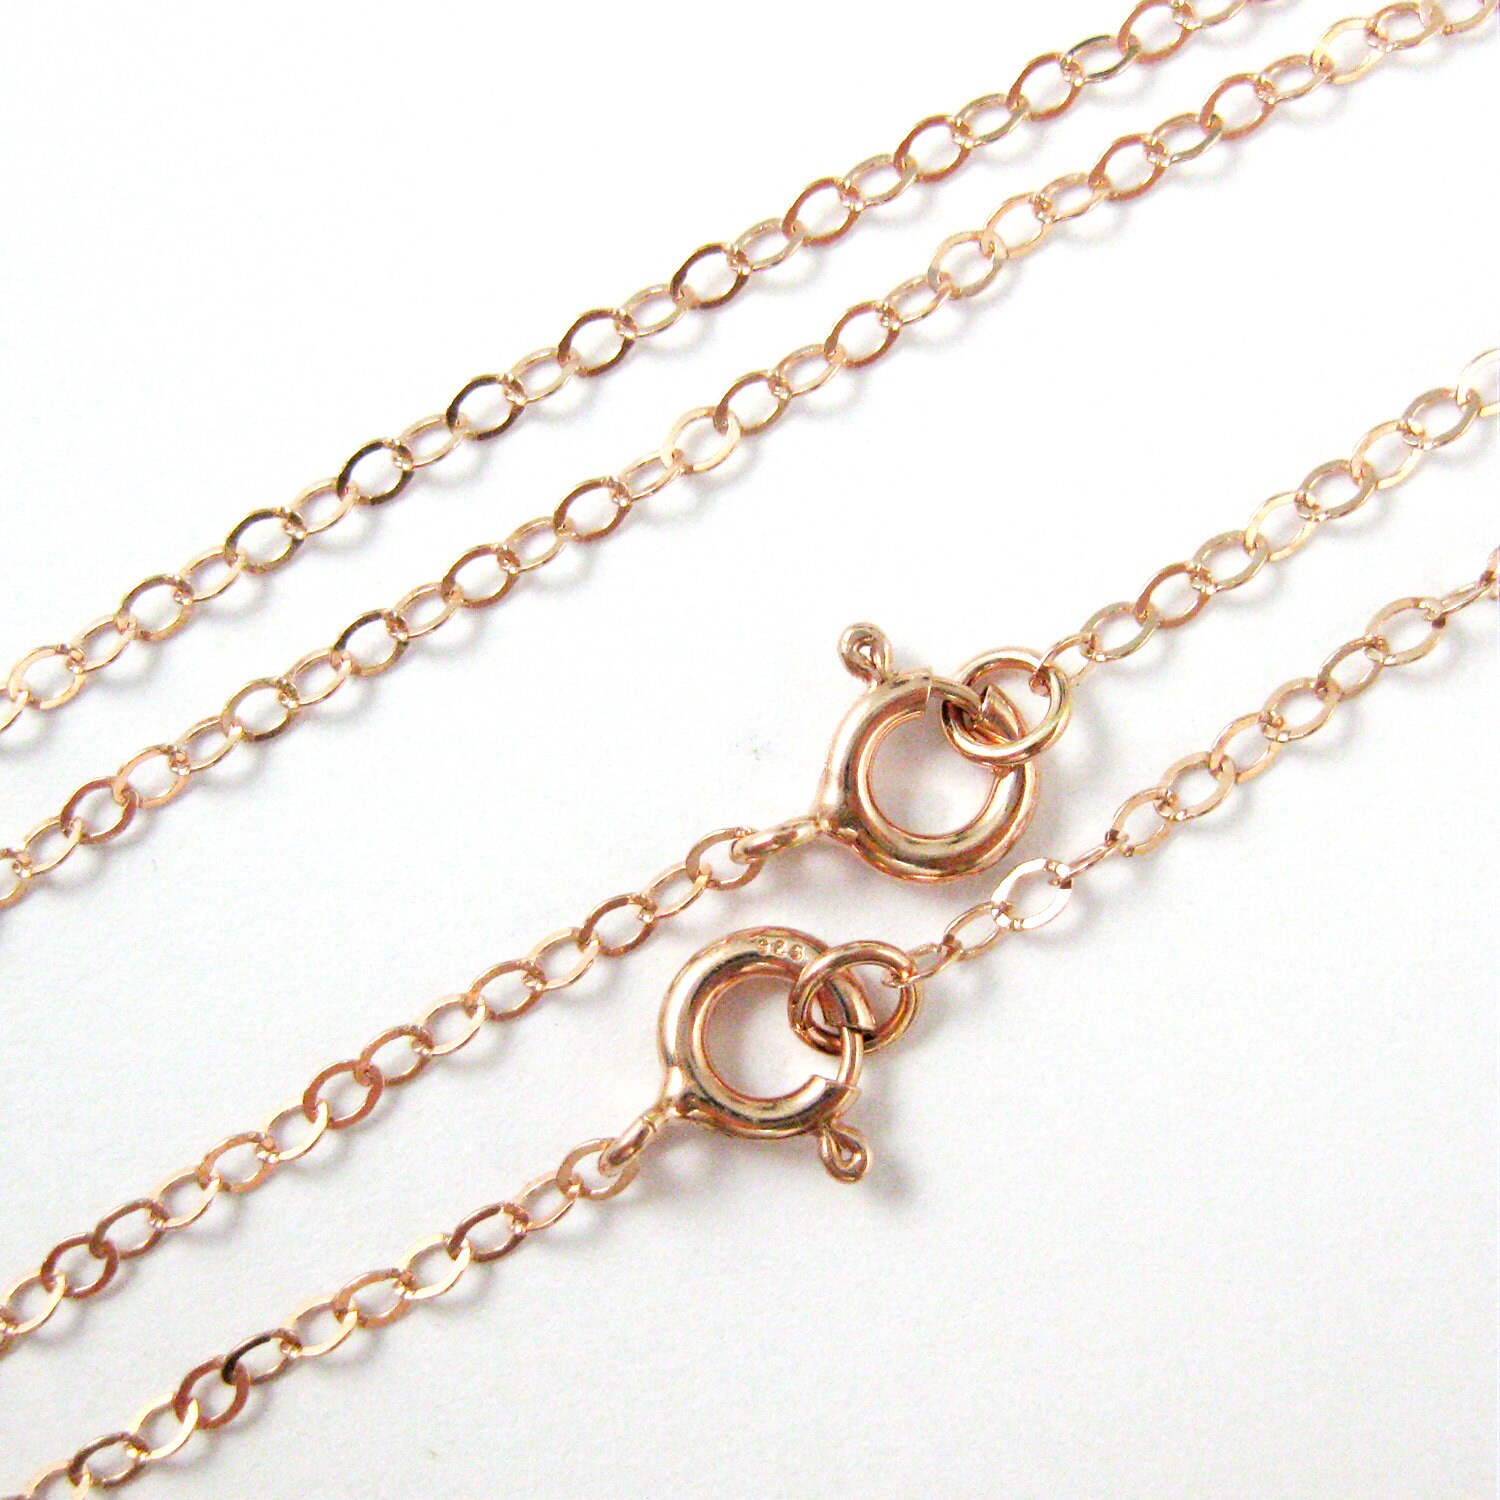 Rose Gold Plated Sterling Silver Chain, Necklace-Cable Flat Oval 2.5 By 2mm - Long Necklace For Pendant 40 Inches Sku 601022-Rg-40